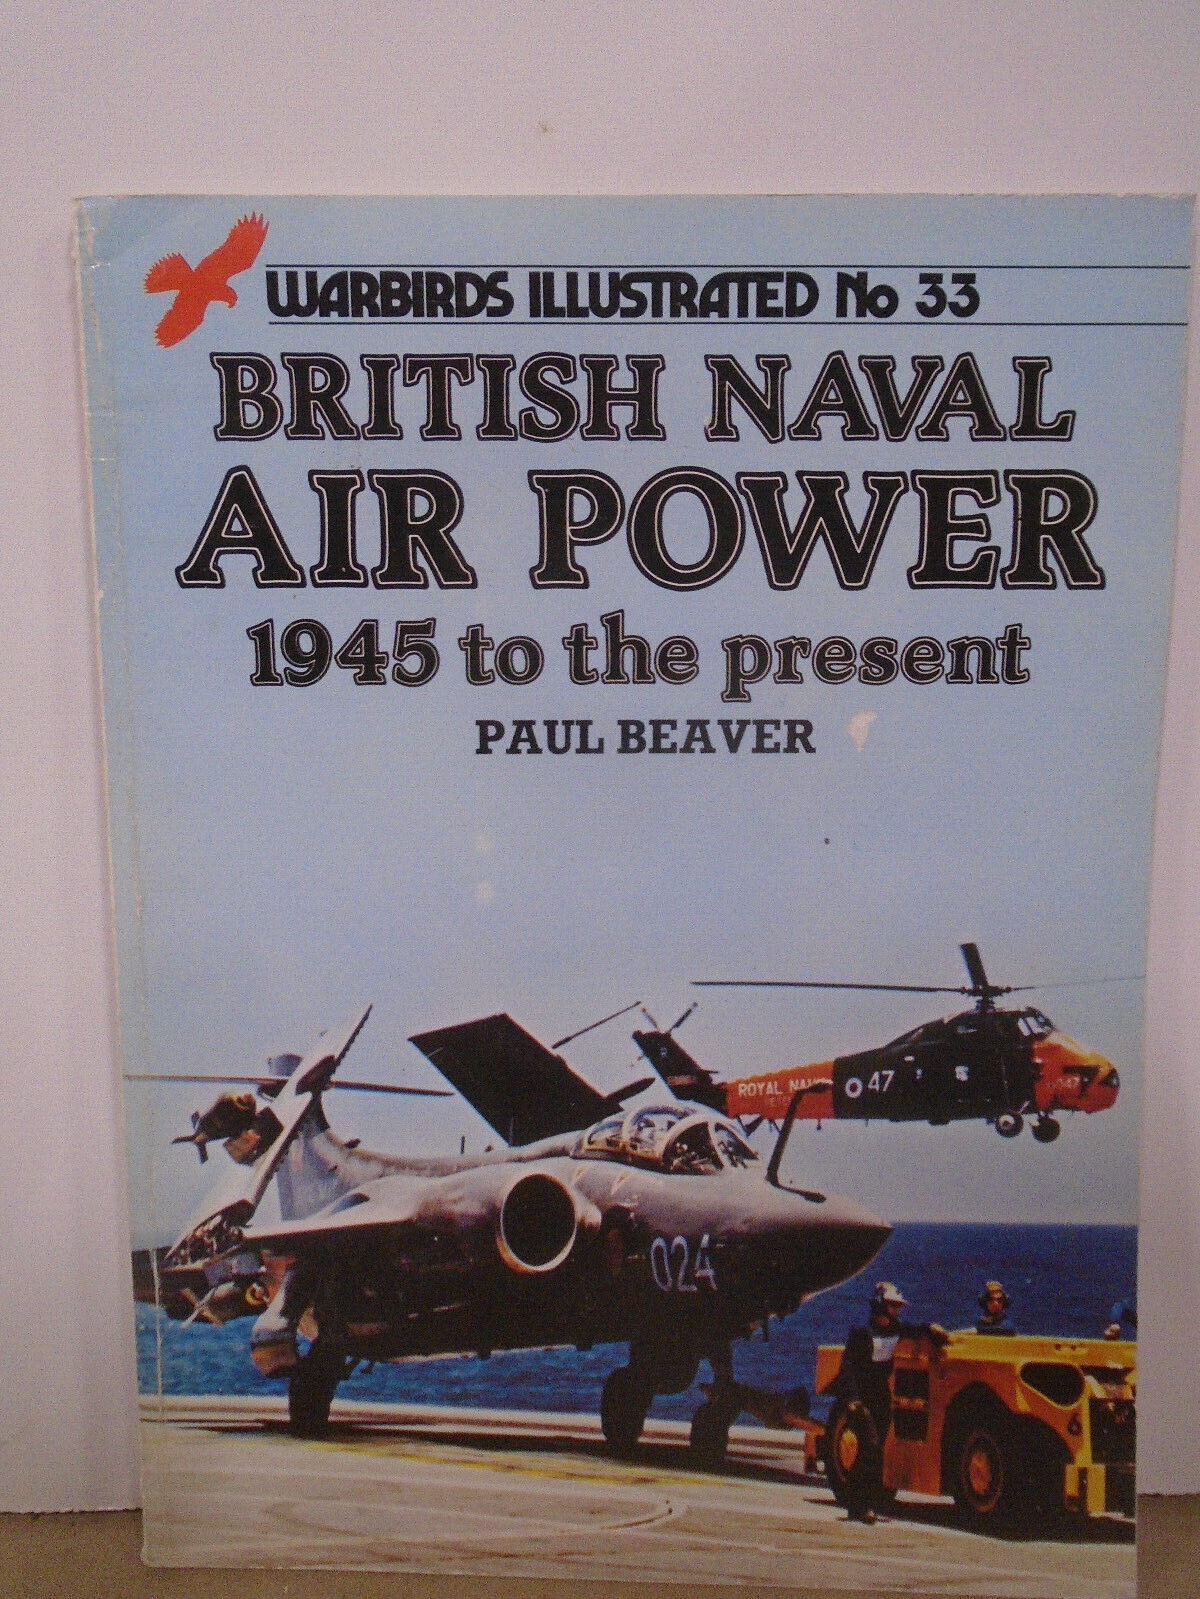 WARBIRDS ILLUSTRATED #33 BRITISH NAVAL AIR POWER 1945 TO THE PRESENT PAUL BEAVER